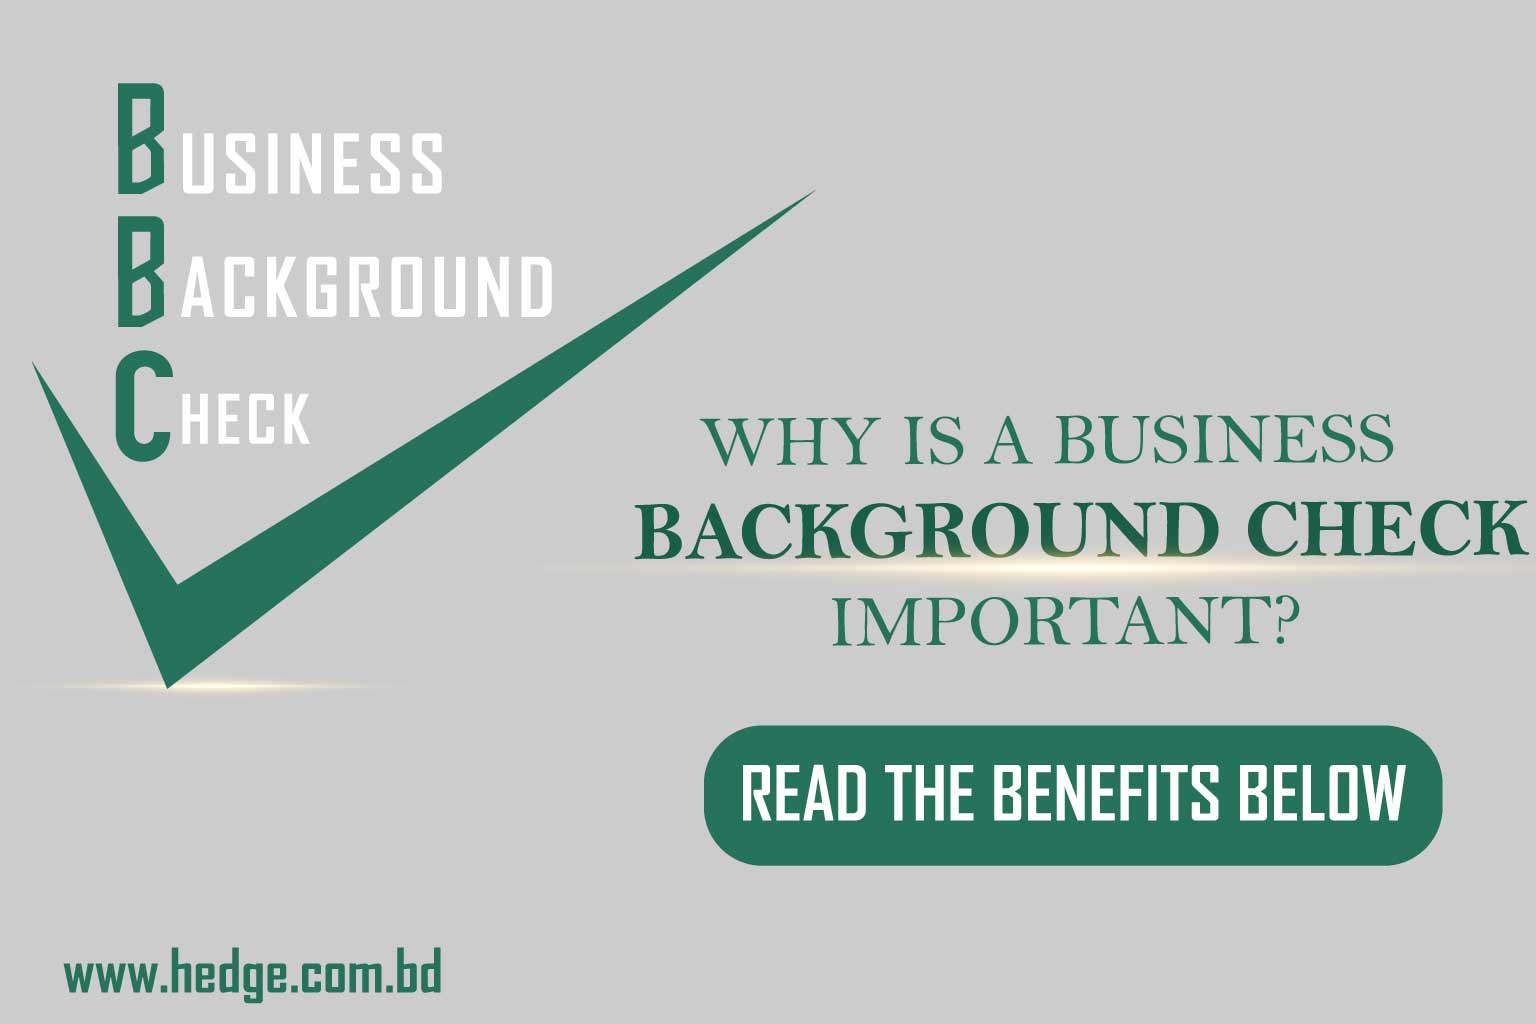 Why is a business background check important